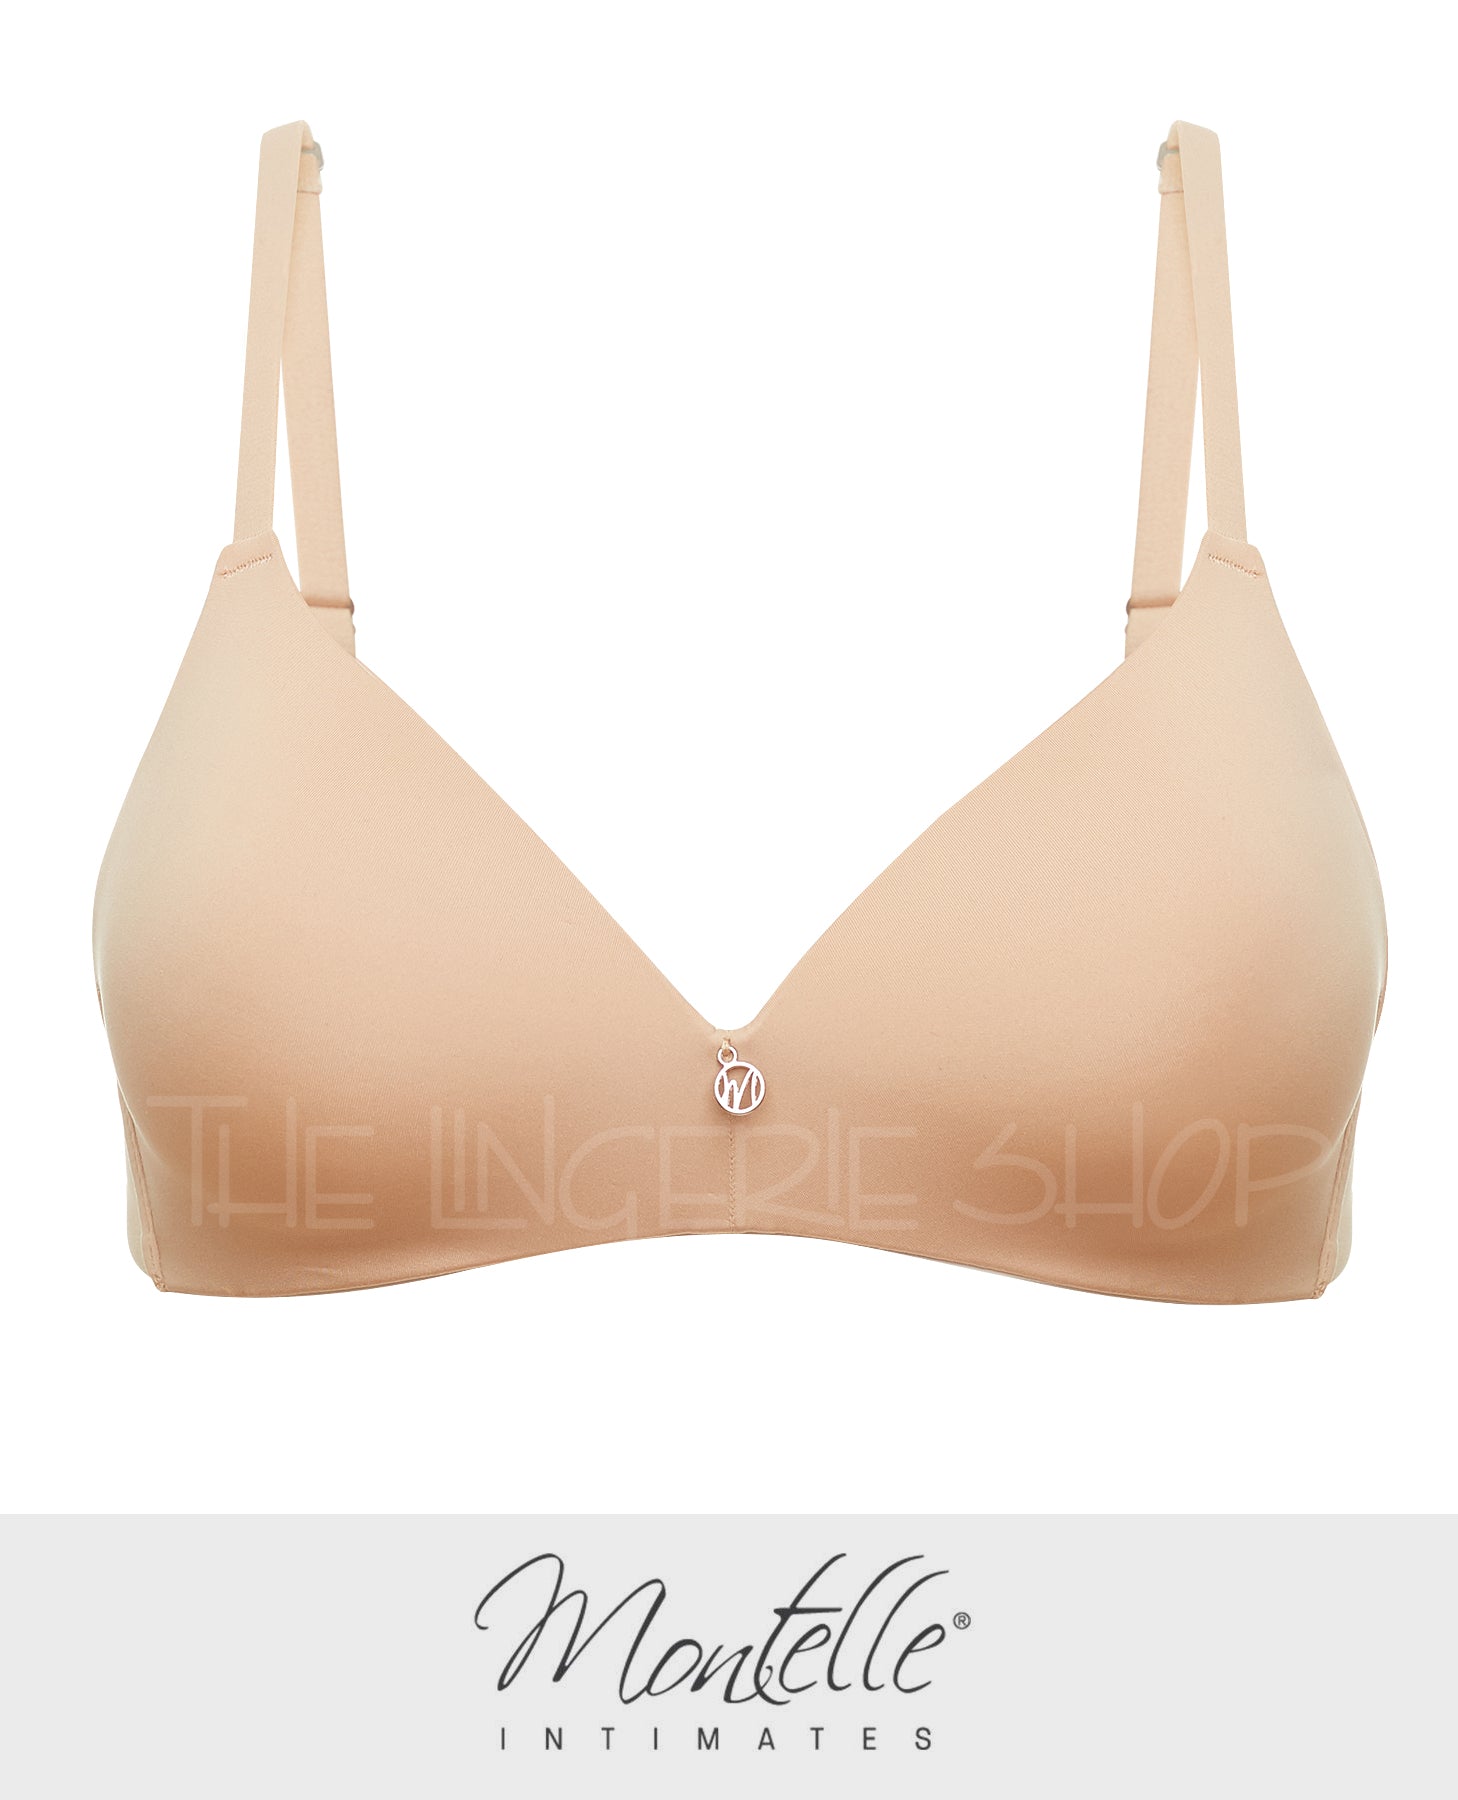 Montelle Wire-Free Moulded T-Shirt Bra 9317 - Montelle 